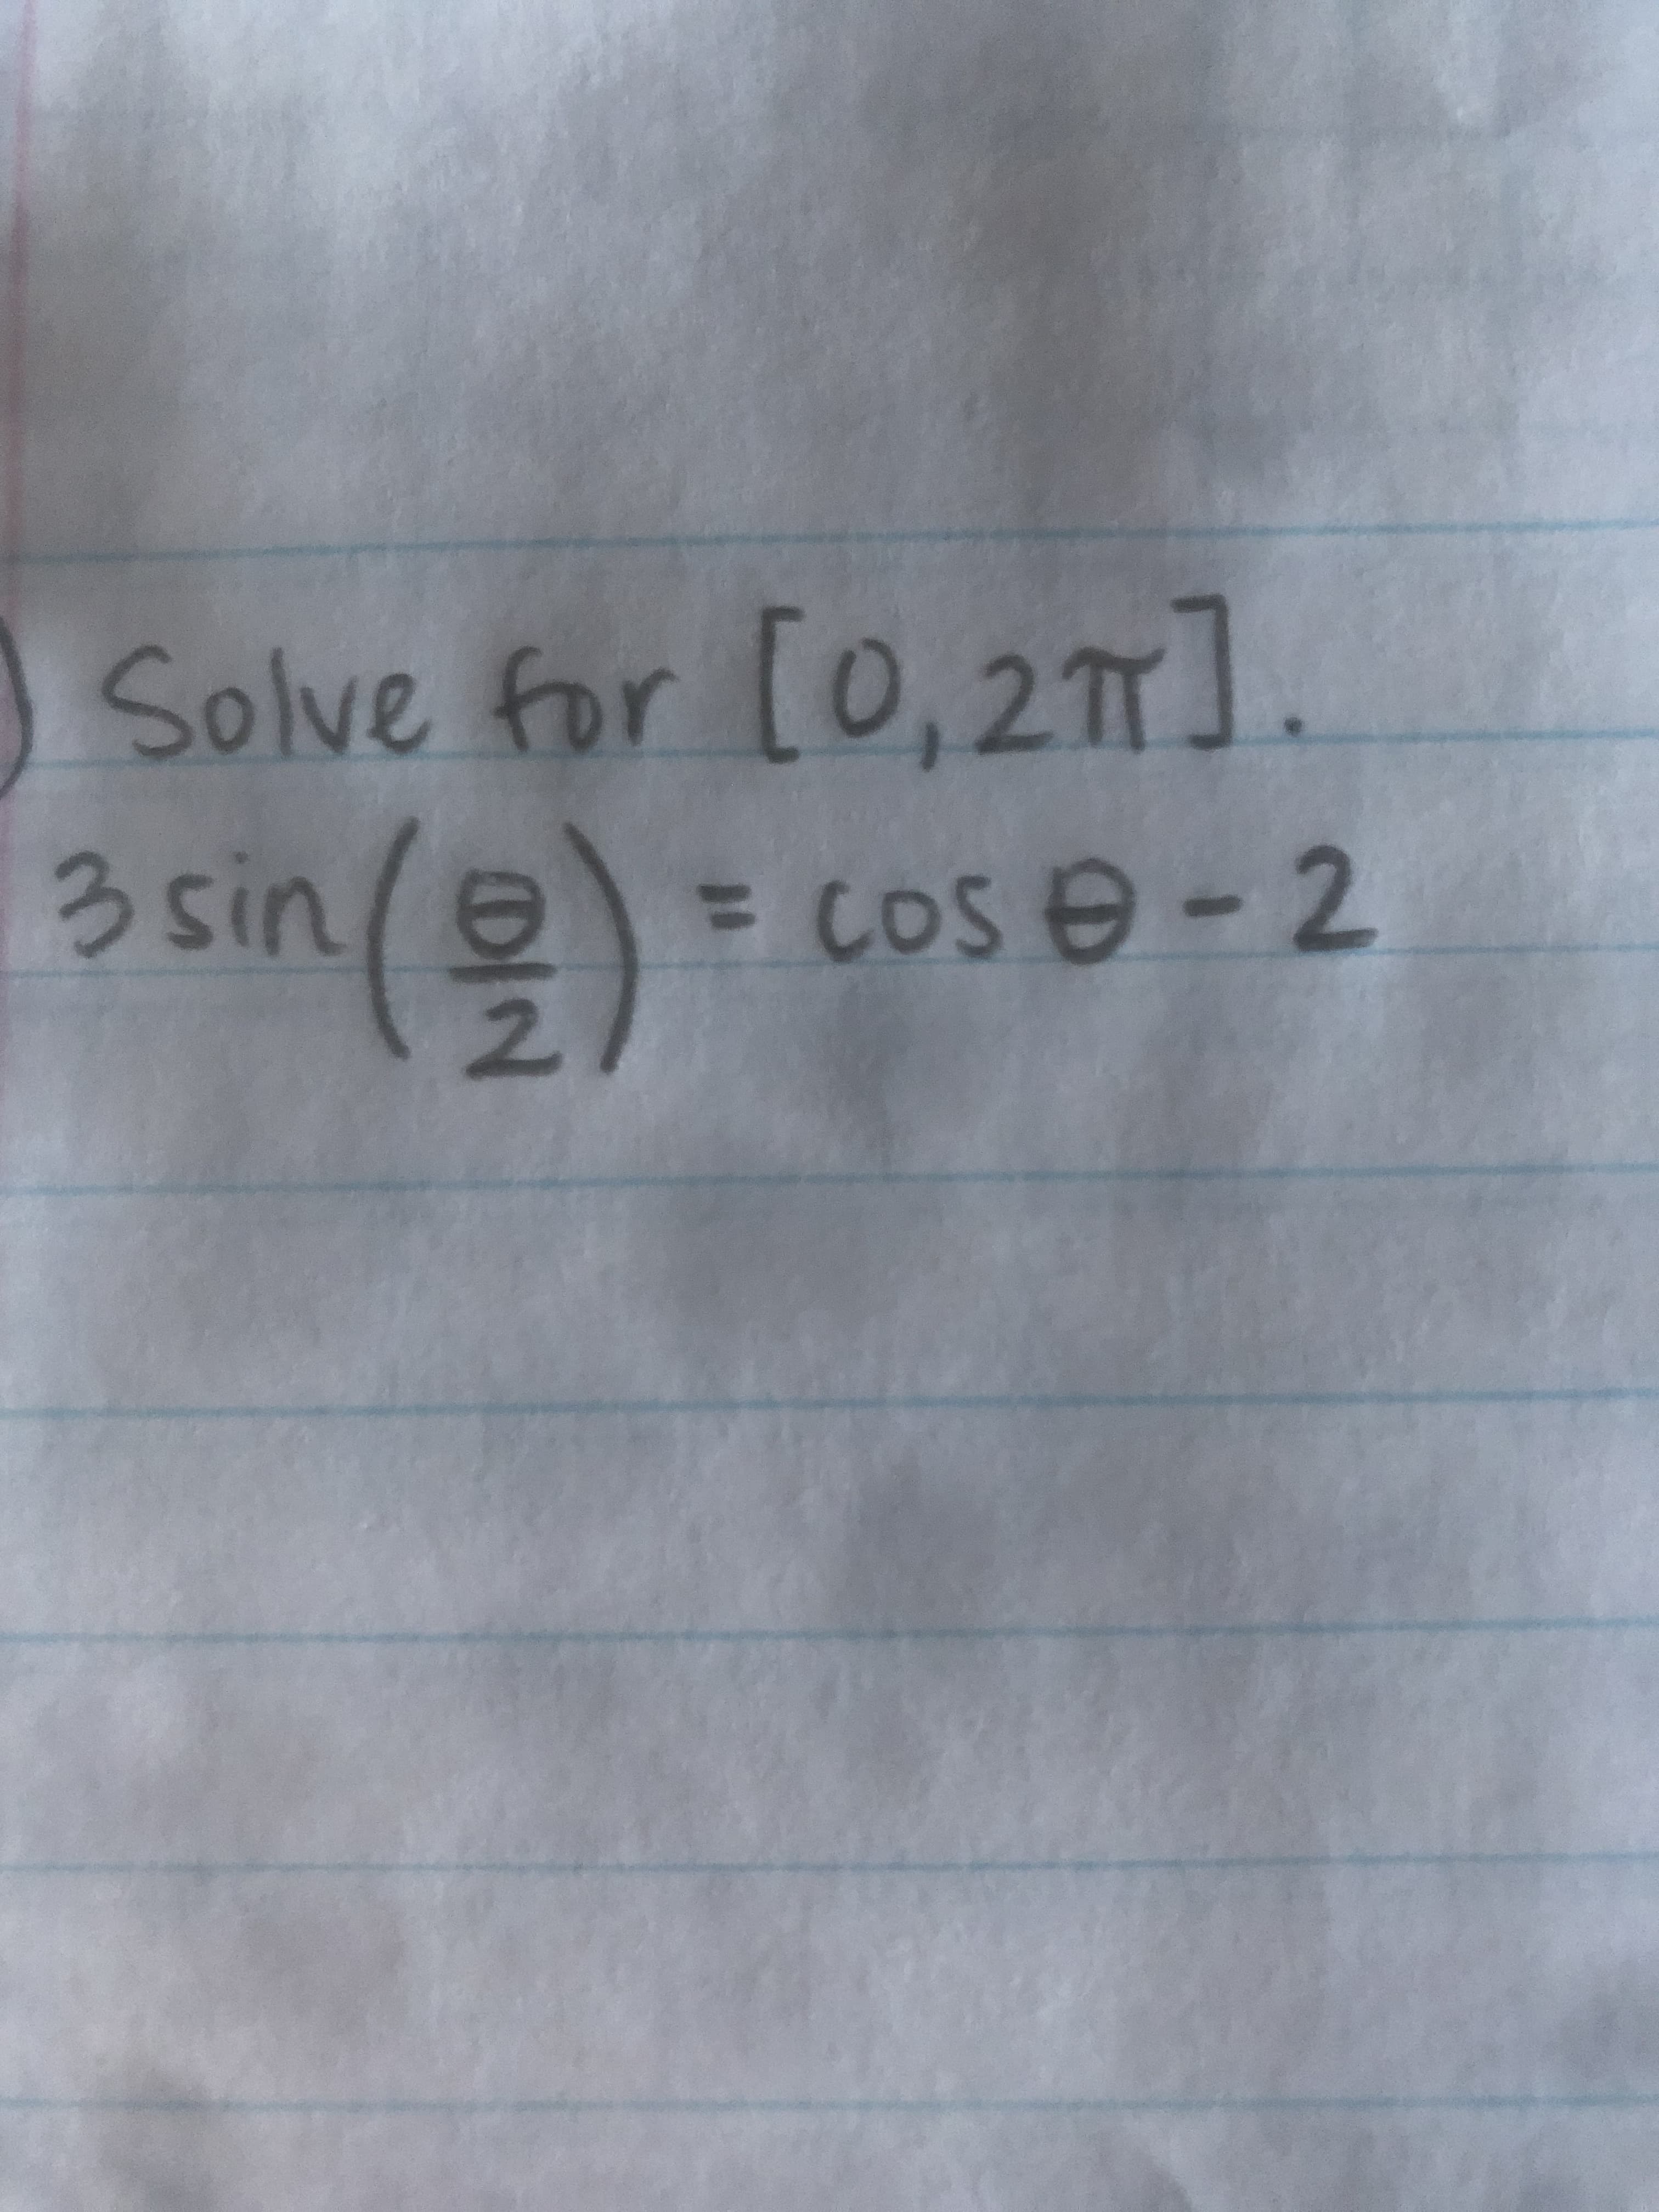 Solve for [0,2].
sin(3)
COS -2
2.
